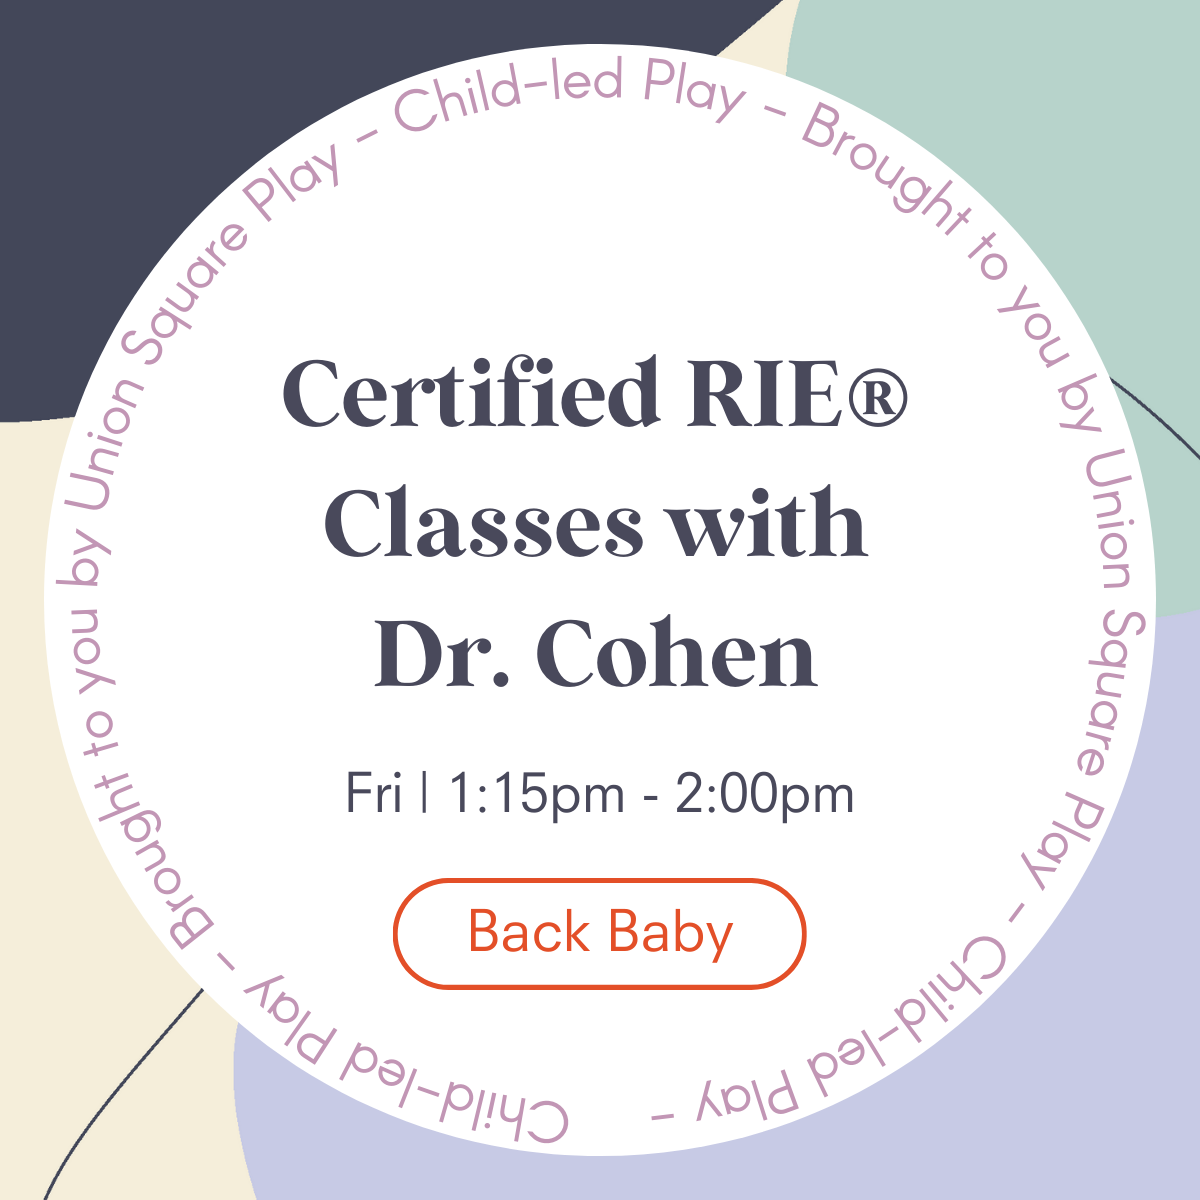 Dr. Cohen’s Certified RIE® Classes - Back Baby